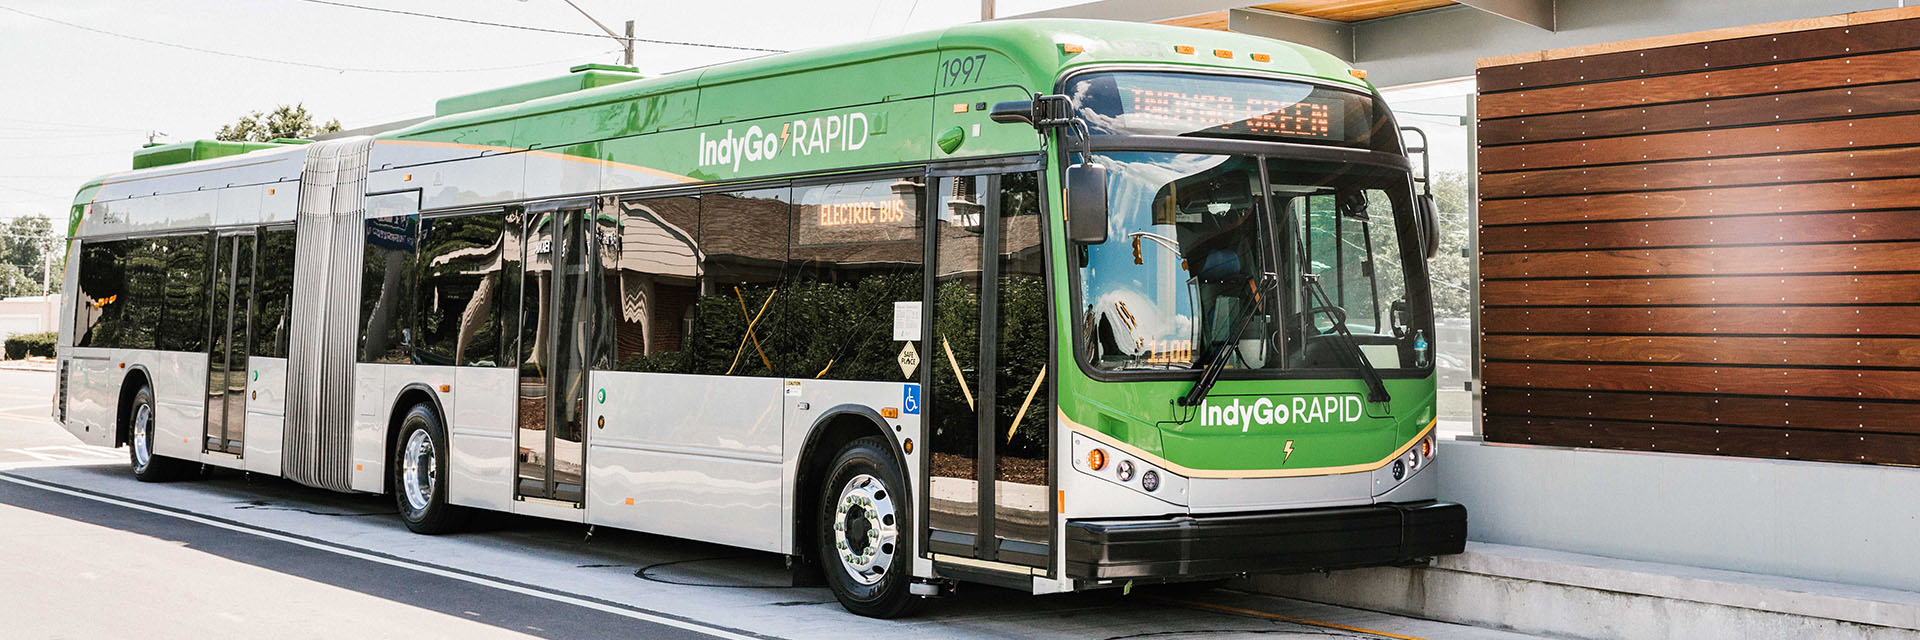 IndyGo electric bus